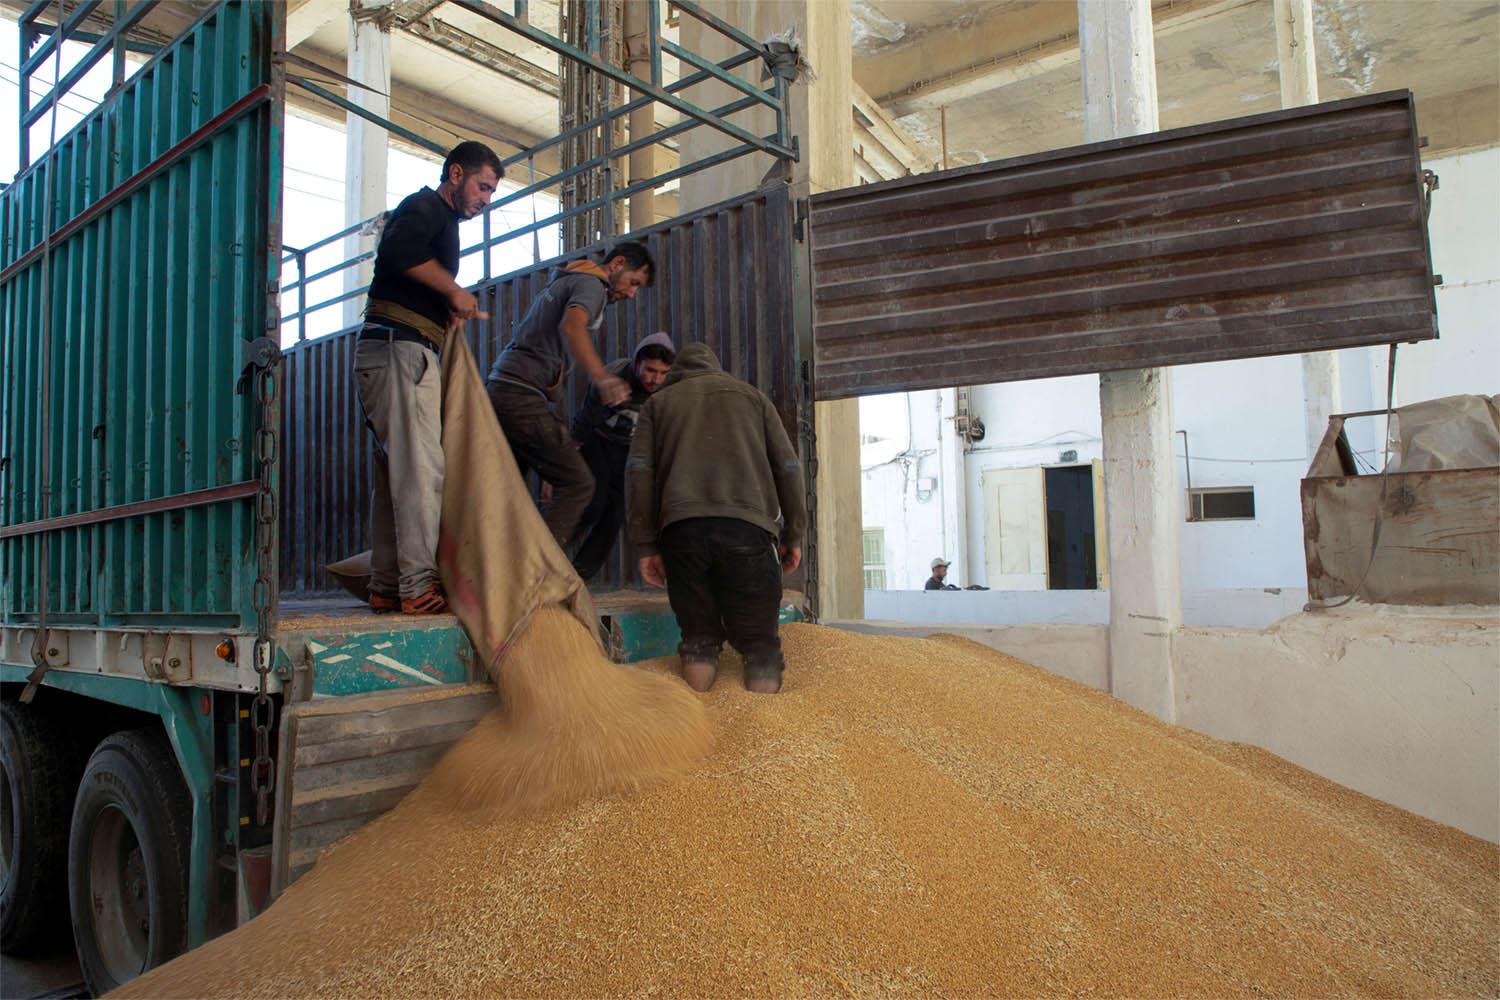 Poor rainfall, fuel shortages, soaring fertilizer prices have taken their toll on Syria's wheat harvest